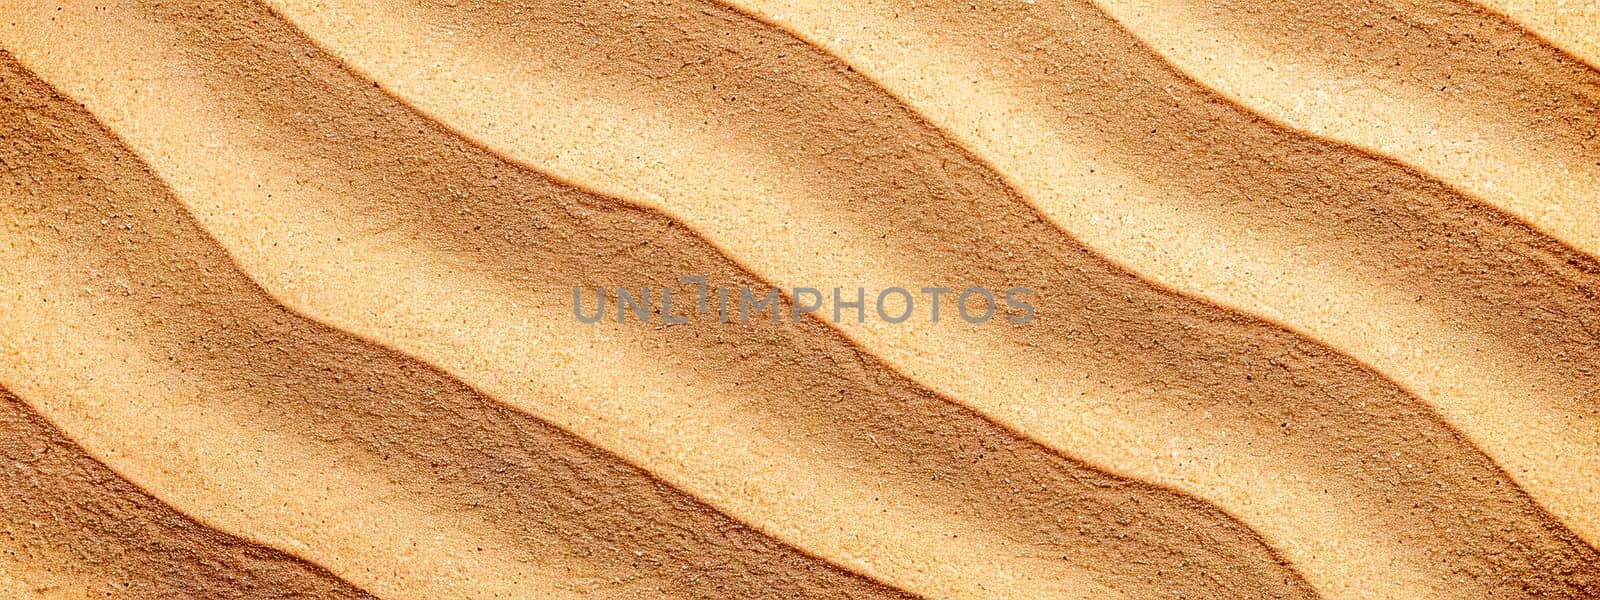 Close-up of the detailed sandy dunes texture with natural wavy patterns and earth tones, perfect for background, wallpaper, or abstract nature surface in a warm, arid outdoor environment